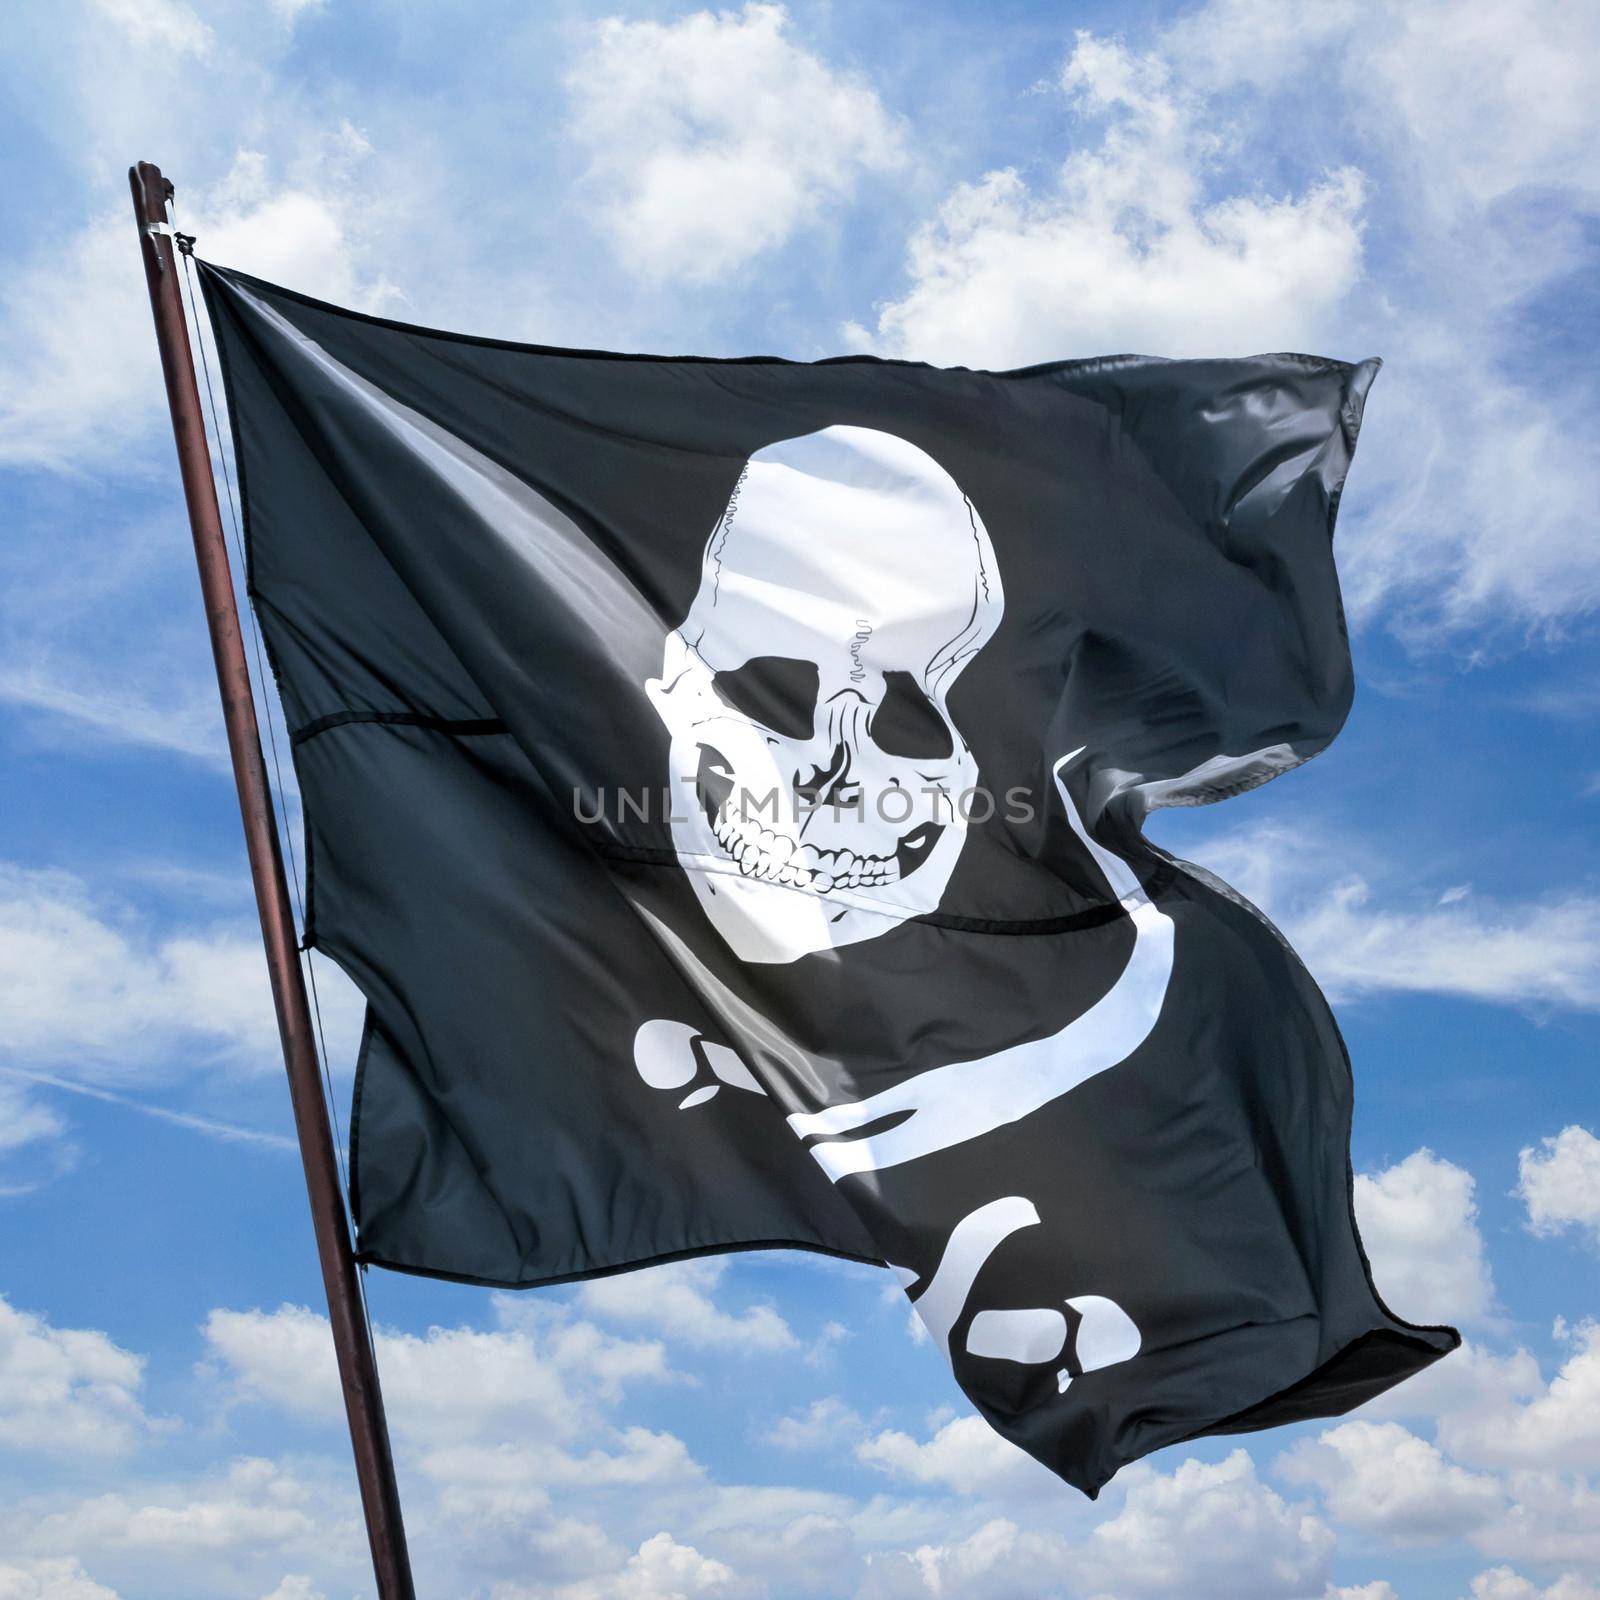 Pirate flag against blue sky. Pirates flag in the wind, depicting the skull and crossbones as a symbol of pirates. Space for text.